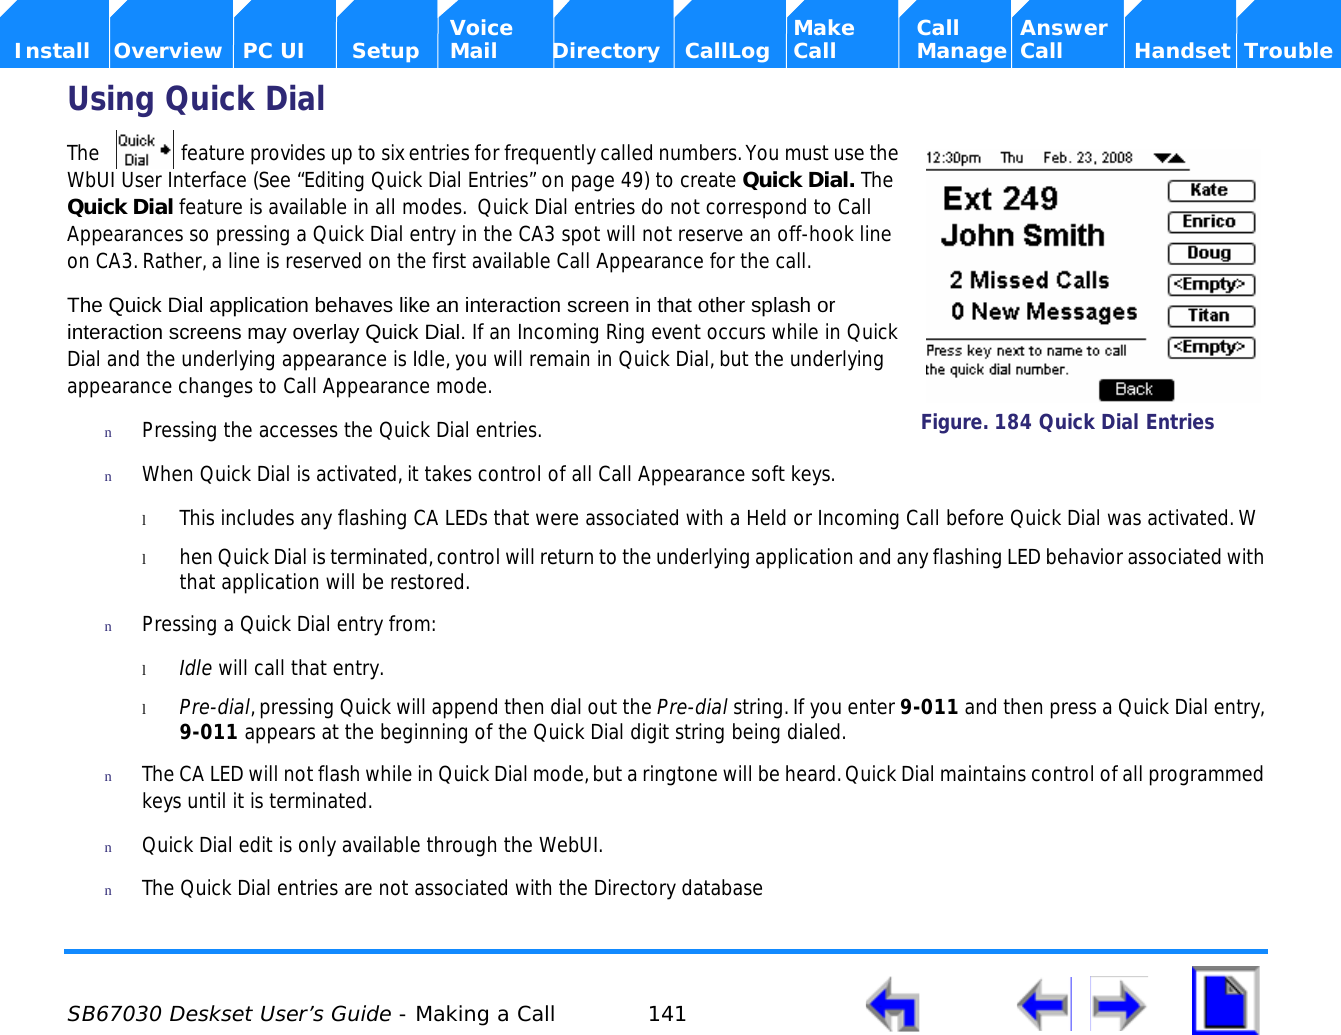  SB67030 Deskset User’s Guide - Making a Call 141    Voice Make Call Answer  Install Overview PC UI Setup Mail Directory CallLog Call Manage Call Handset TroubleUsing Quick DialThe   feature provides up to six entries for frequently called numbers. You must use the WbUI User Interface (See “Editing Quick Dial Entries” on page 49) to create Quick Dial. The Quick Dial feature is available in all modes.  Quick Dial entries do not correspond to Call Appearances so pressing a Quick Dial entry in the CA3 spot will not reserve an off-hook line on CA3. Rather, a line is reserved on the first available Call Appearance for the call.The Quick Dial application behaves like an interaction screen in that other splash or interaction screens may overlay Quick Dial. If an Incoming Ring event occurs while in Quick Dial and the underlying appearance is Idle, you will remain in Quick Dial, but the underlying appearance changes to Call Appearance mode. nPressing the accesses the Quick Dial entries. nWhen Quick Dial is activated, it takes control of all Call Appearance soft keys. lThis includes any flashing CA LEDs that were associated with a Held or Incoming Call before Quick Dial was activated. Wlhen Quick Dial is terminated, control will return to the underlying application and any flashing LED behavior associated with that application will be restored.nPressing a Quick Dial entry from:lIdle will call that entry.lPre-dial, pressing Quick will append then dial out the Pre-dial string. If you enter 9-011 and then press a Quick Dial entry, 9-011 appears at the beginning of the Quick Dial digit string being dialed.nThe CA LED will not flash while in Quick Dial mode, but a ringtone will be heard. Quick Dial maintains control of all programmed keys until it is terminated. nQuick Dial edit is only available through the WebUI.nThe Quick Dial entries are not associated with the Directory databaseFigure. 184 Quick Dial Entries